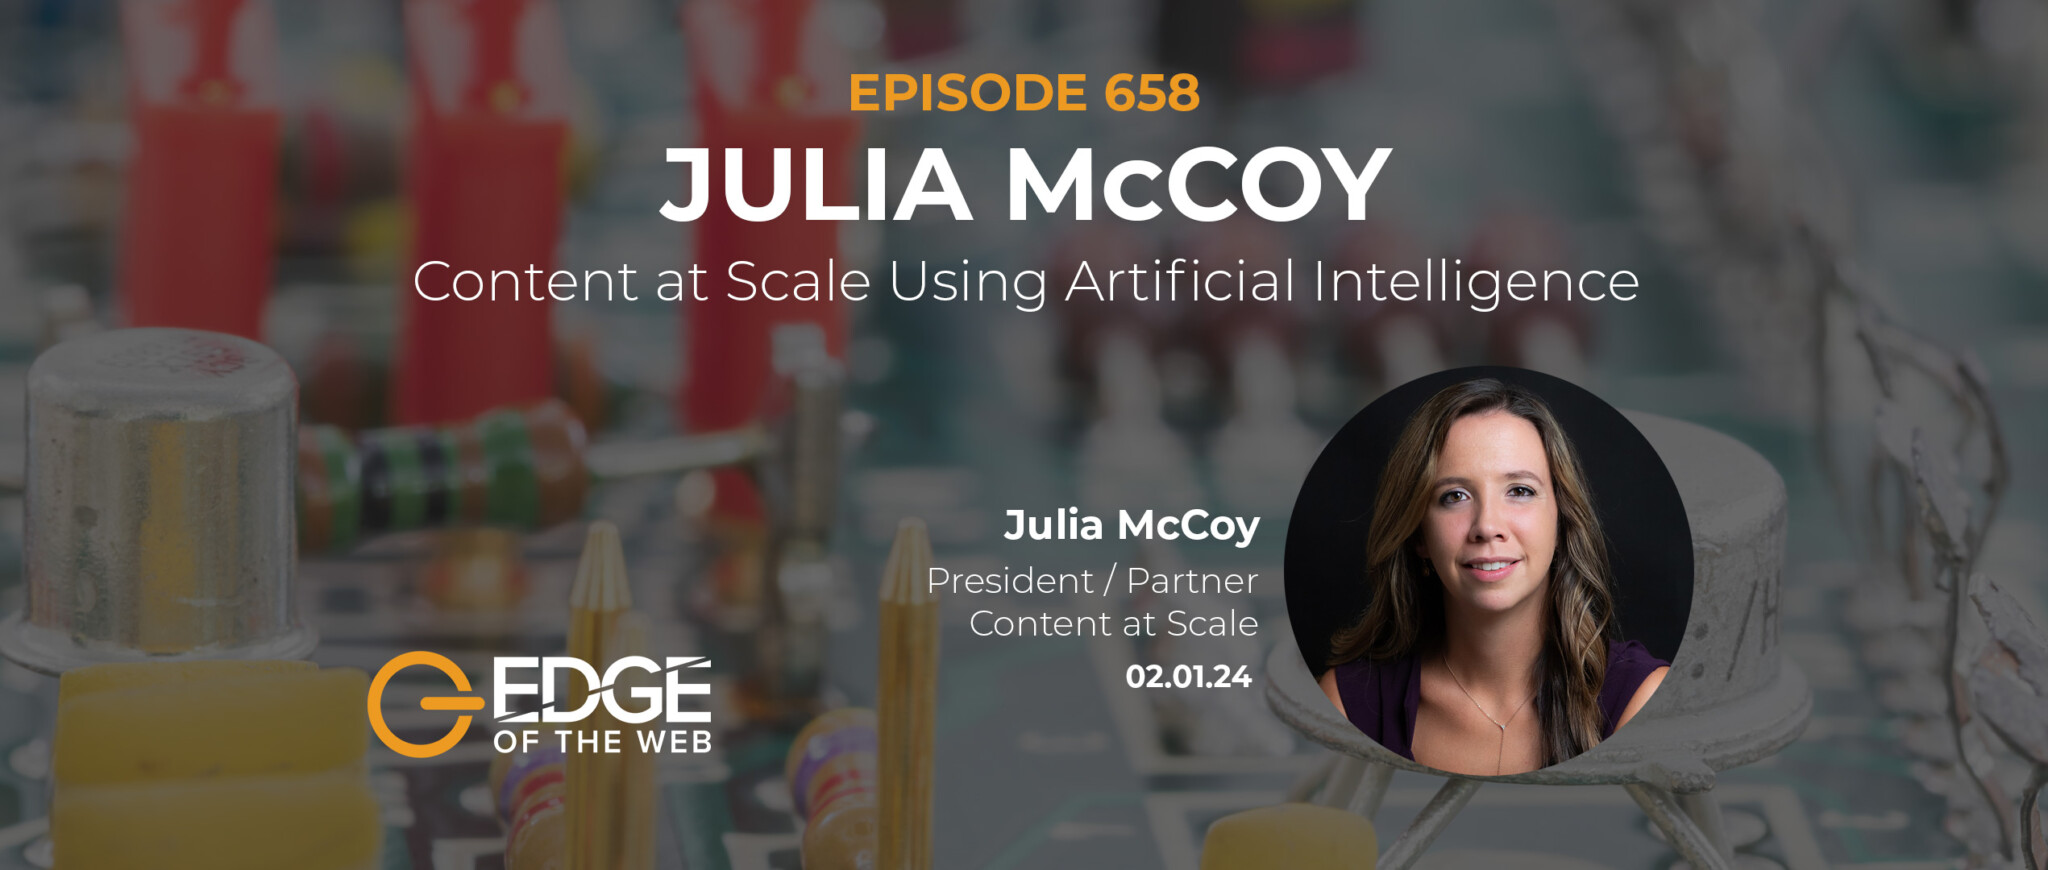 Episode 658: Content at Scale Using Artificial Intelligence w/ Julia McCoy